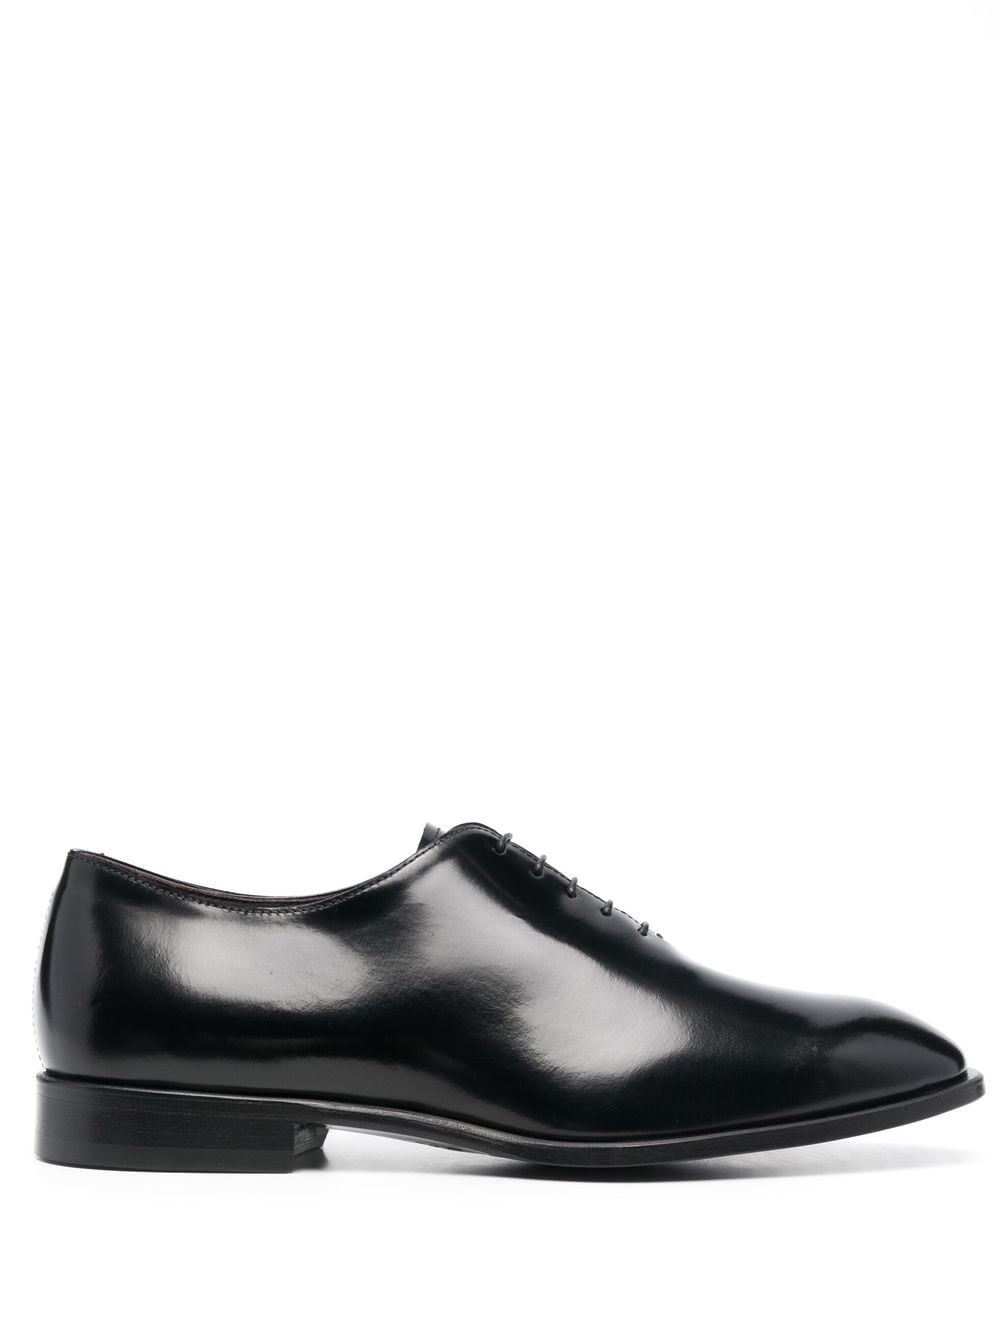 Canali polished leather Oxford shoes - Black von Canali